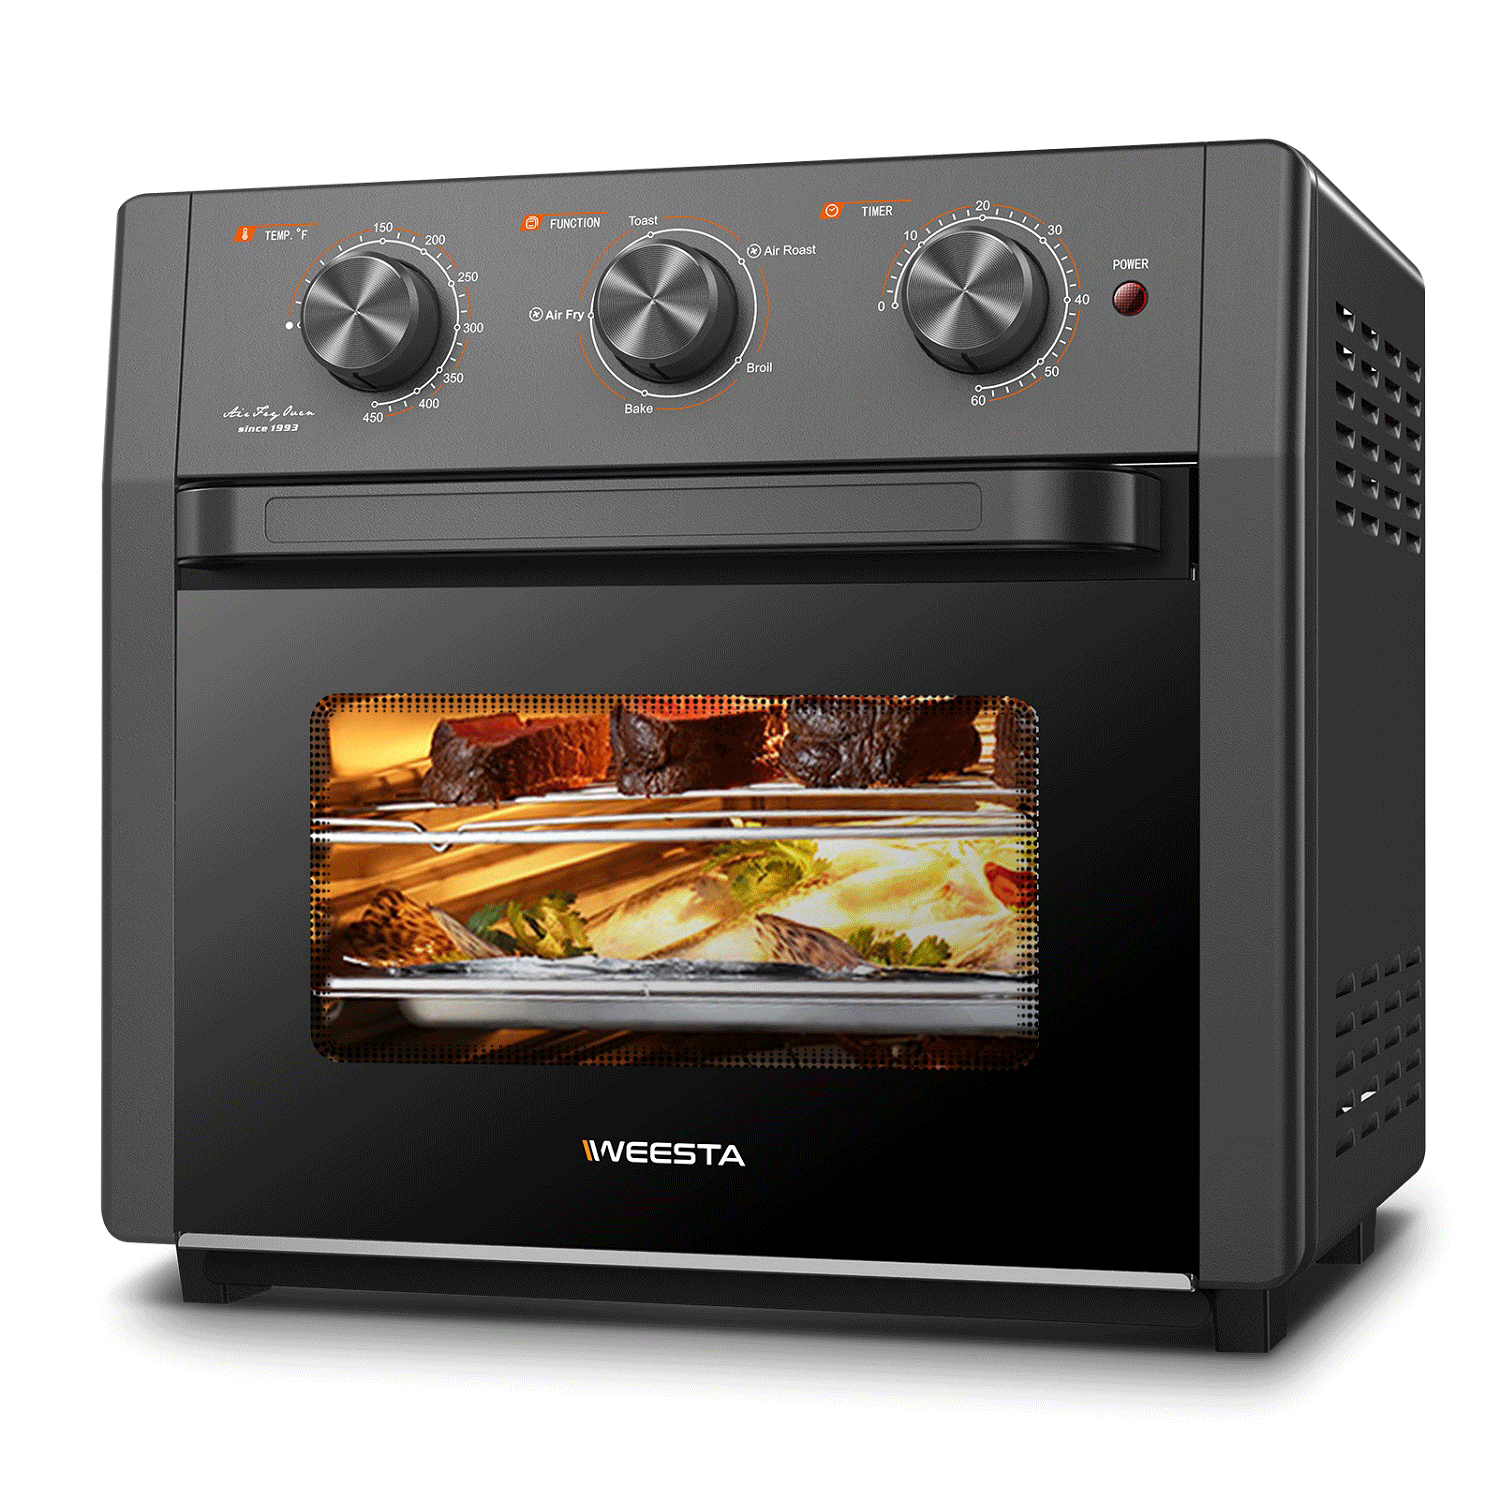 PETSITE Toaster Oven Air Fryer Combo 21.5 Quart, Xl Large Convection  Countertop Oven, Stainless Steel Kitchen Oilless Cooker with 4 Cooking